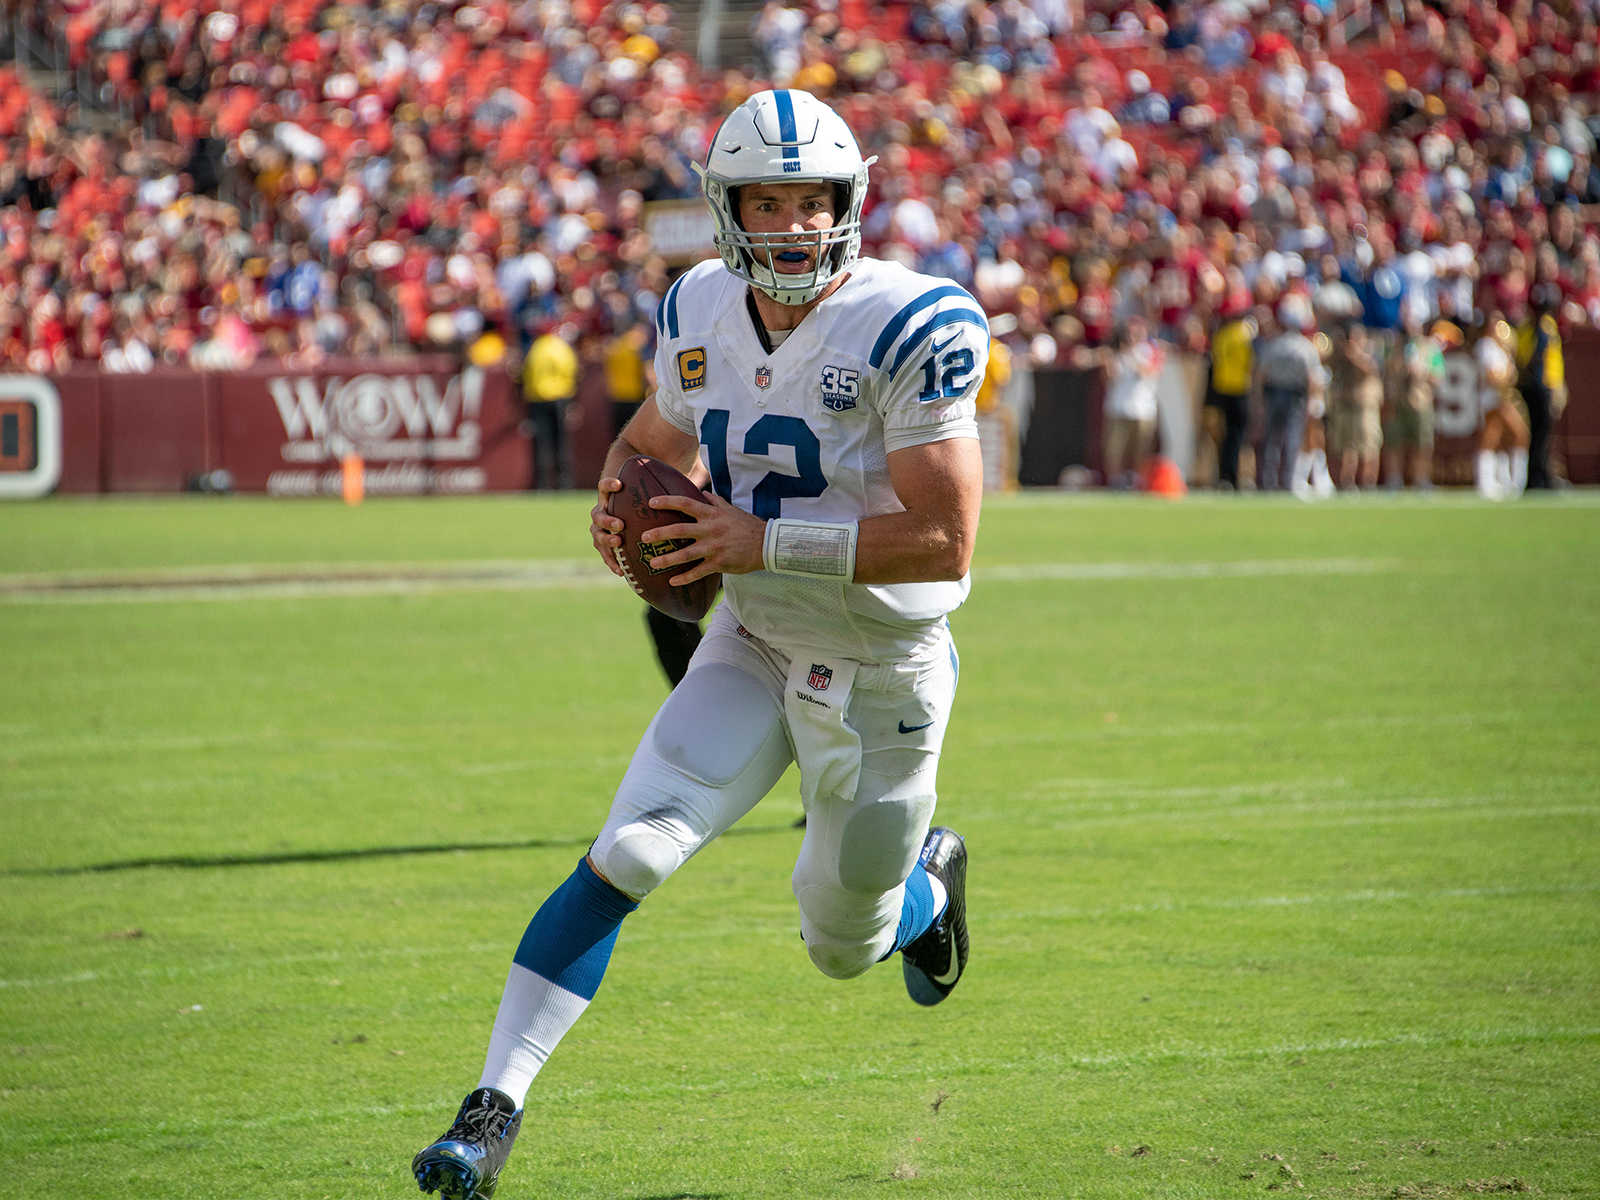 Quarterback Andrew Luck carries the ball in the fourth quarter against the Washington Redskins in Maryland in 2018